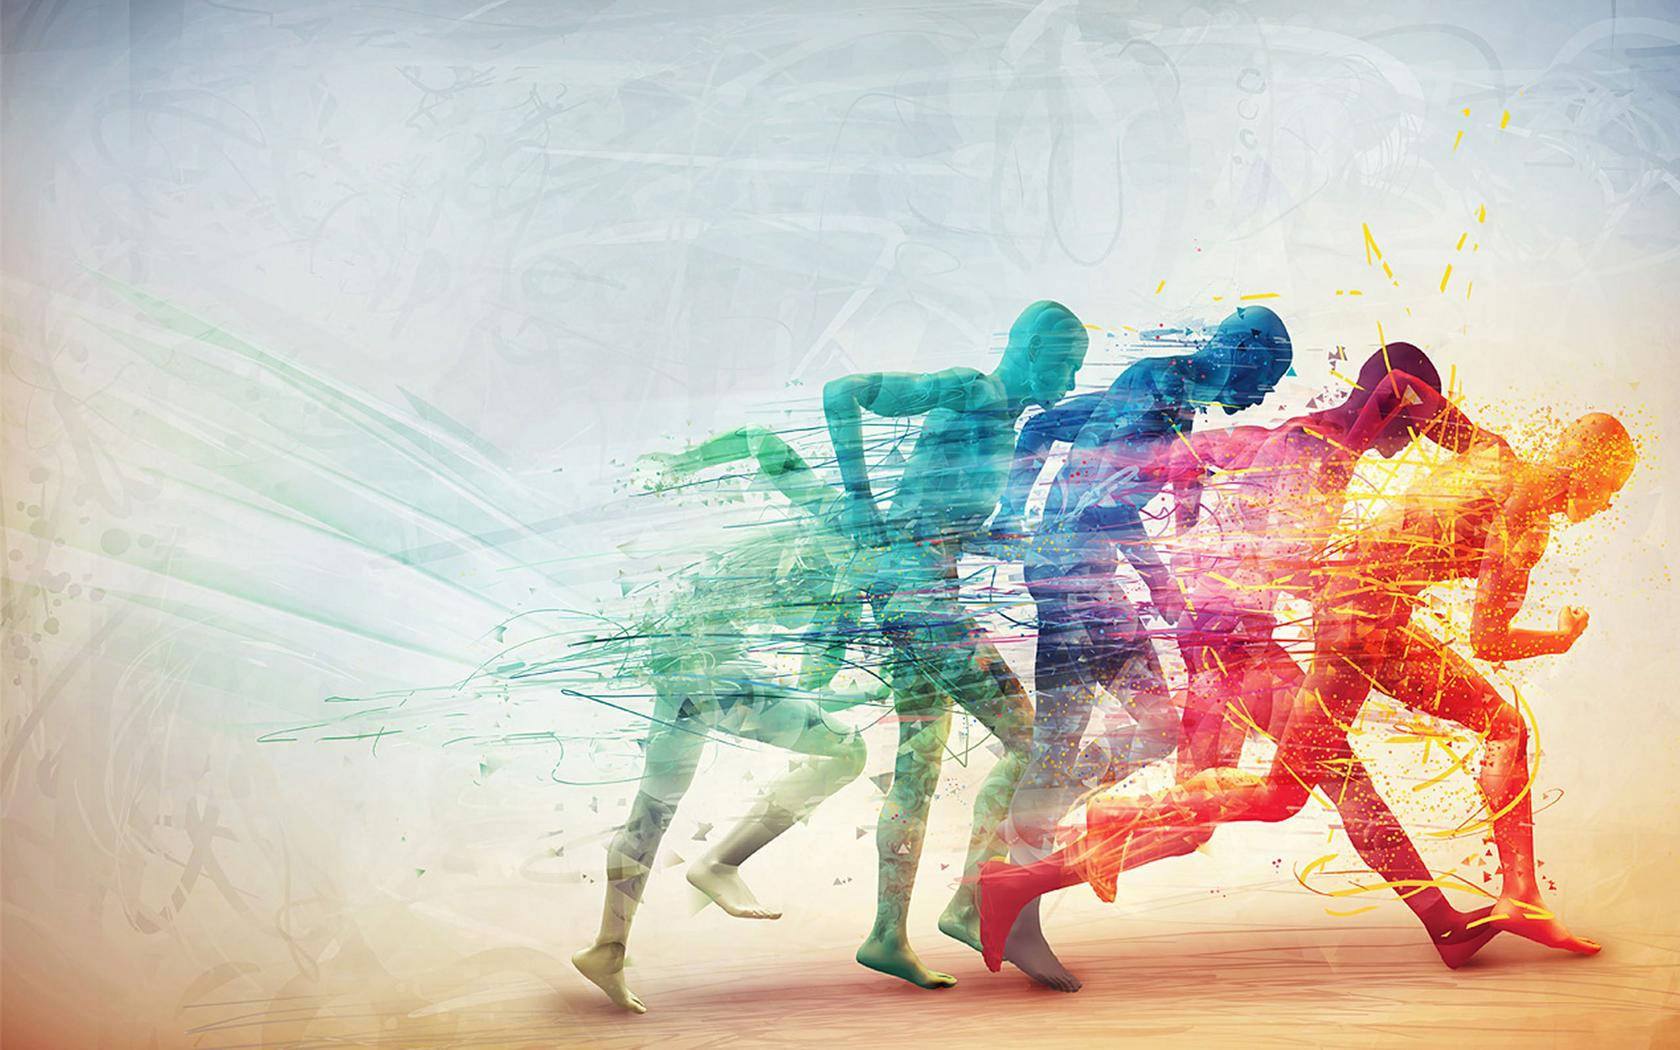 Running Physical Therapy Colorful Digital Art Wallpaper